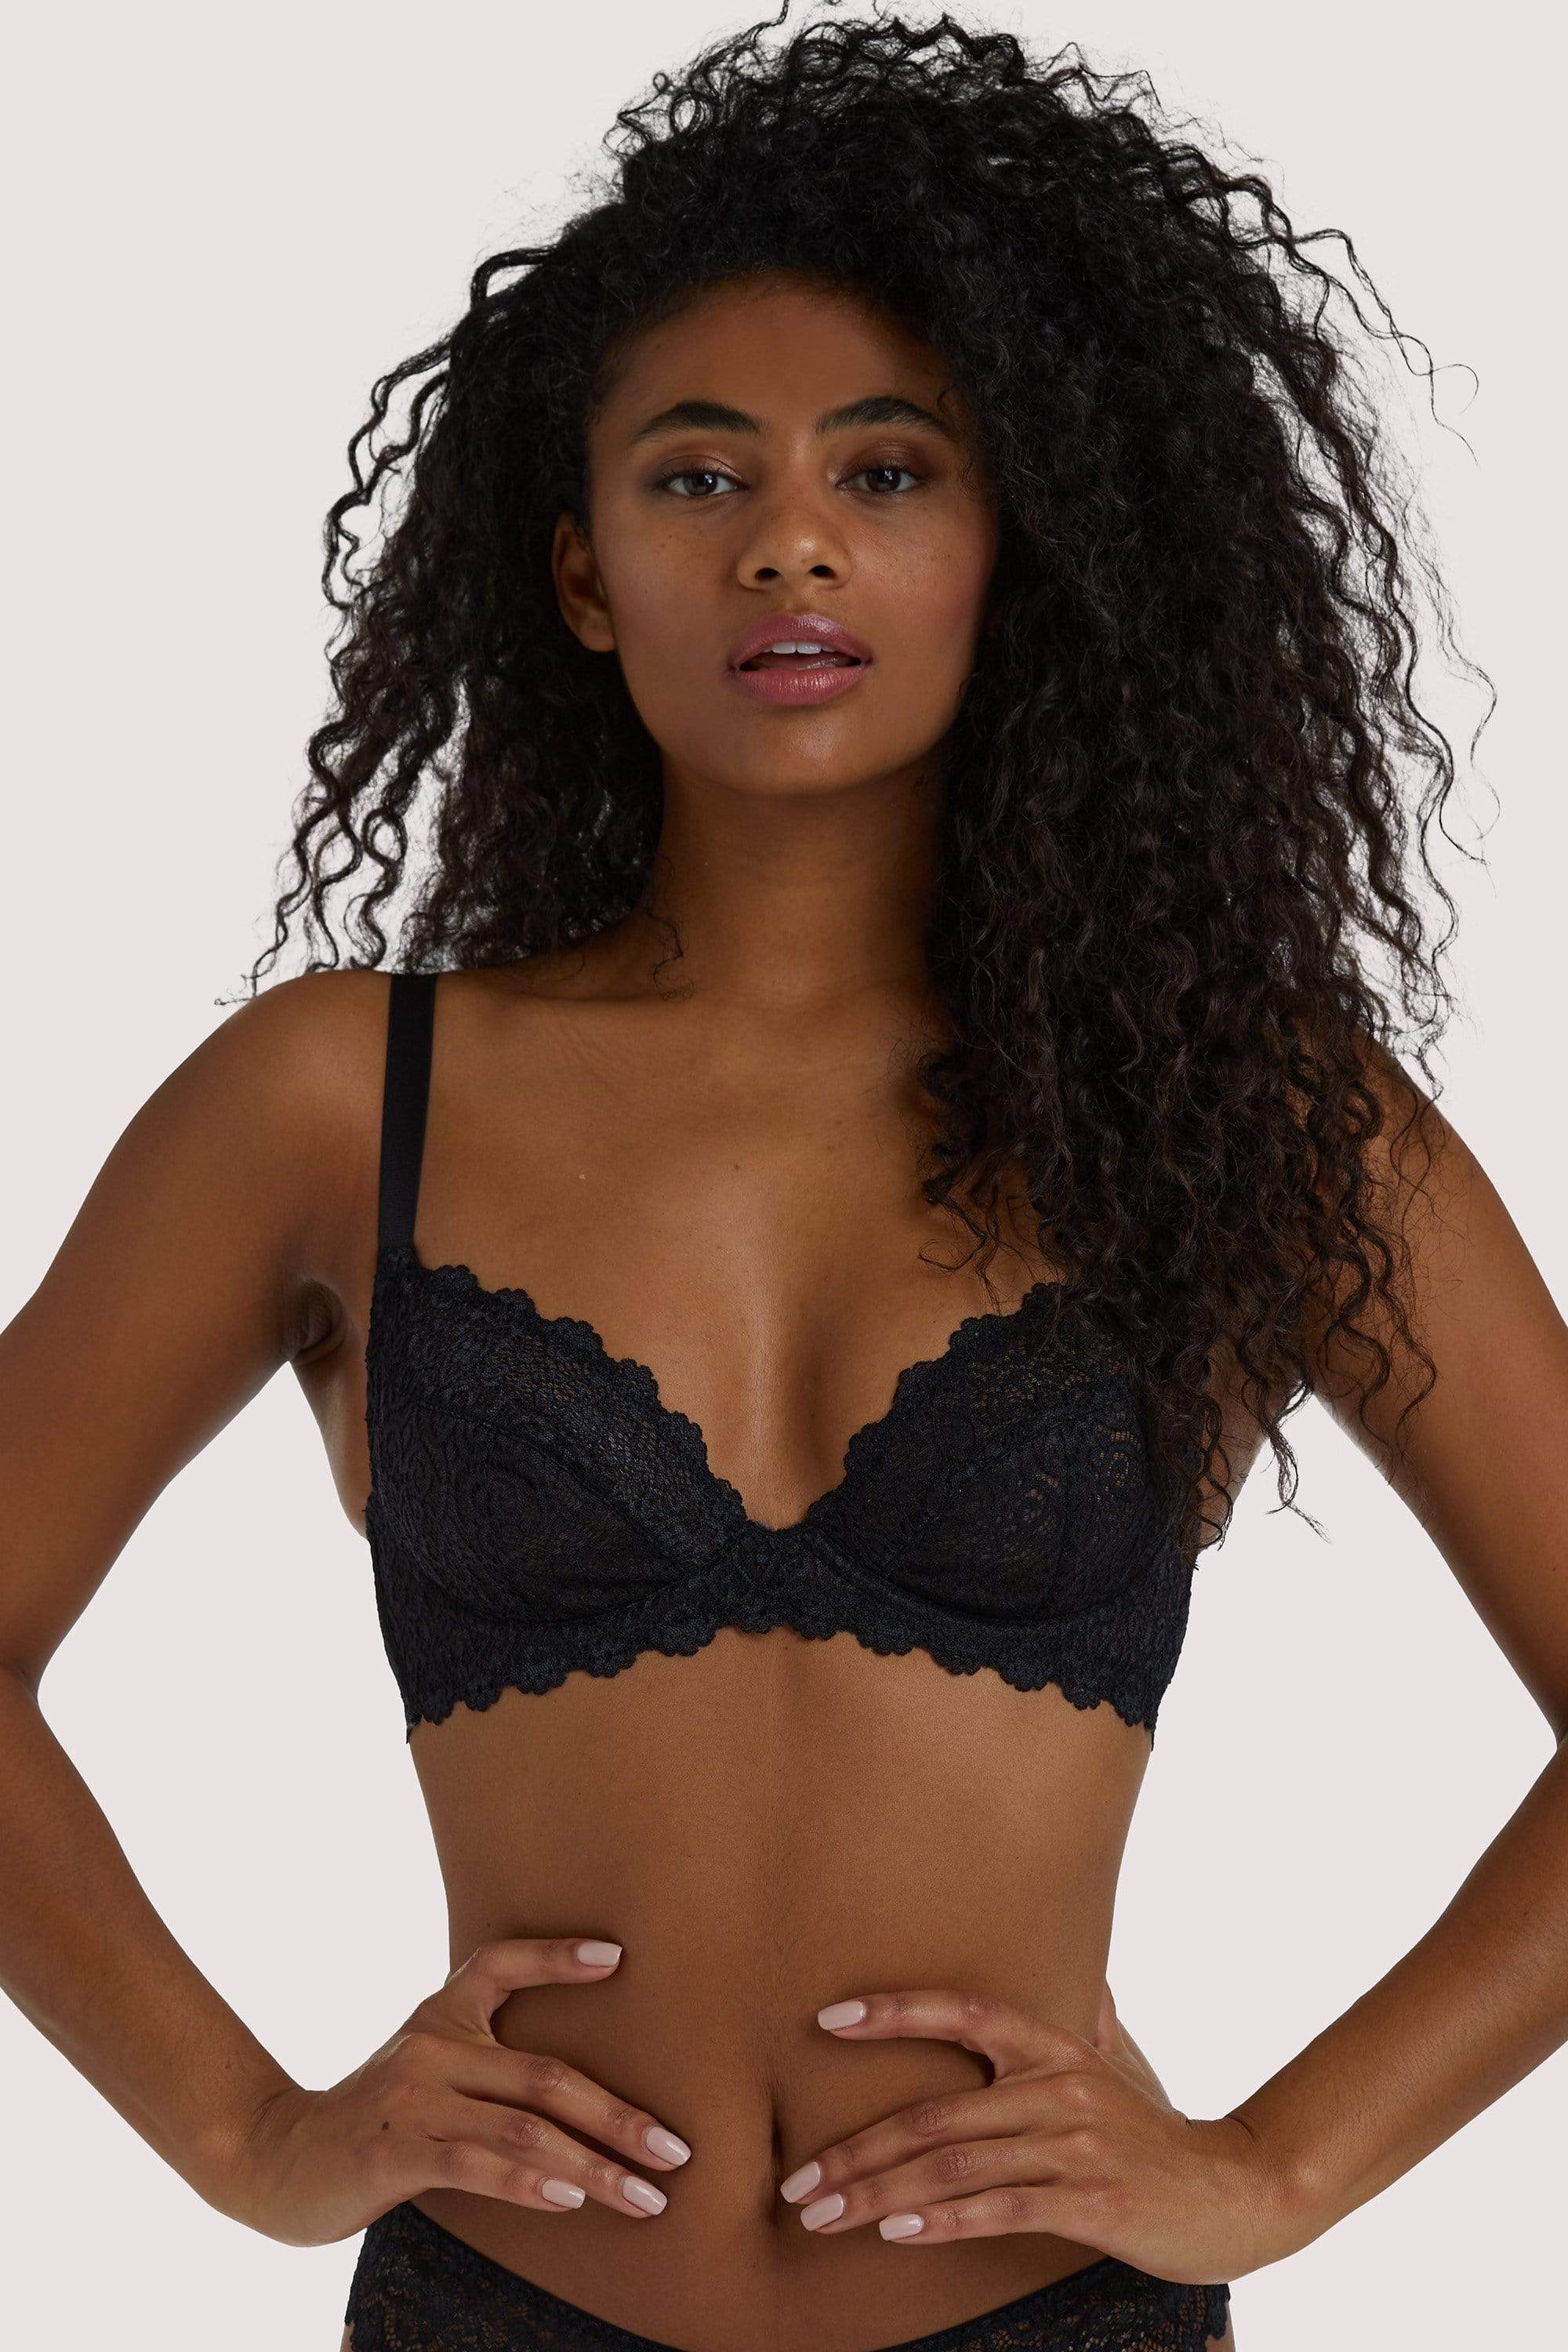 Tru Diva Daily Bra Non Padded Wire Free High Coverage Moulded Cup  (Black-30C)